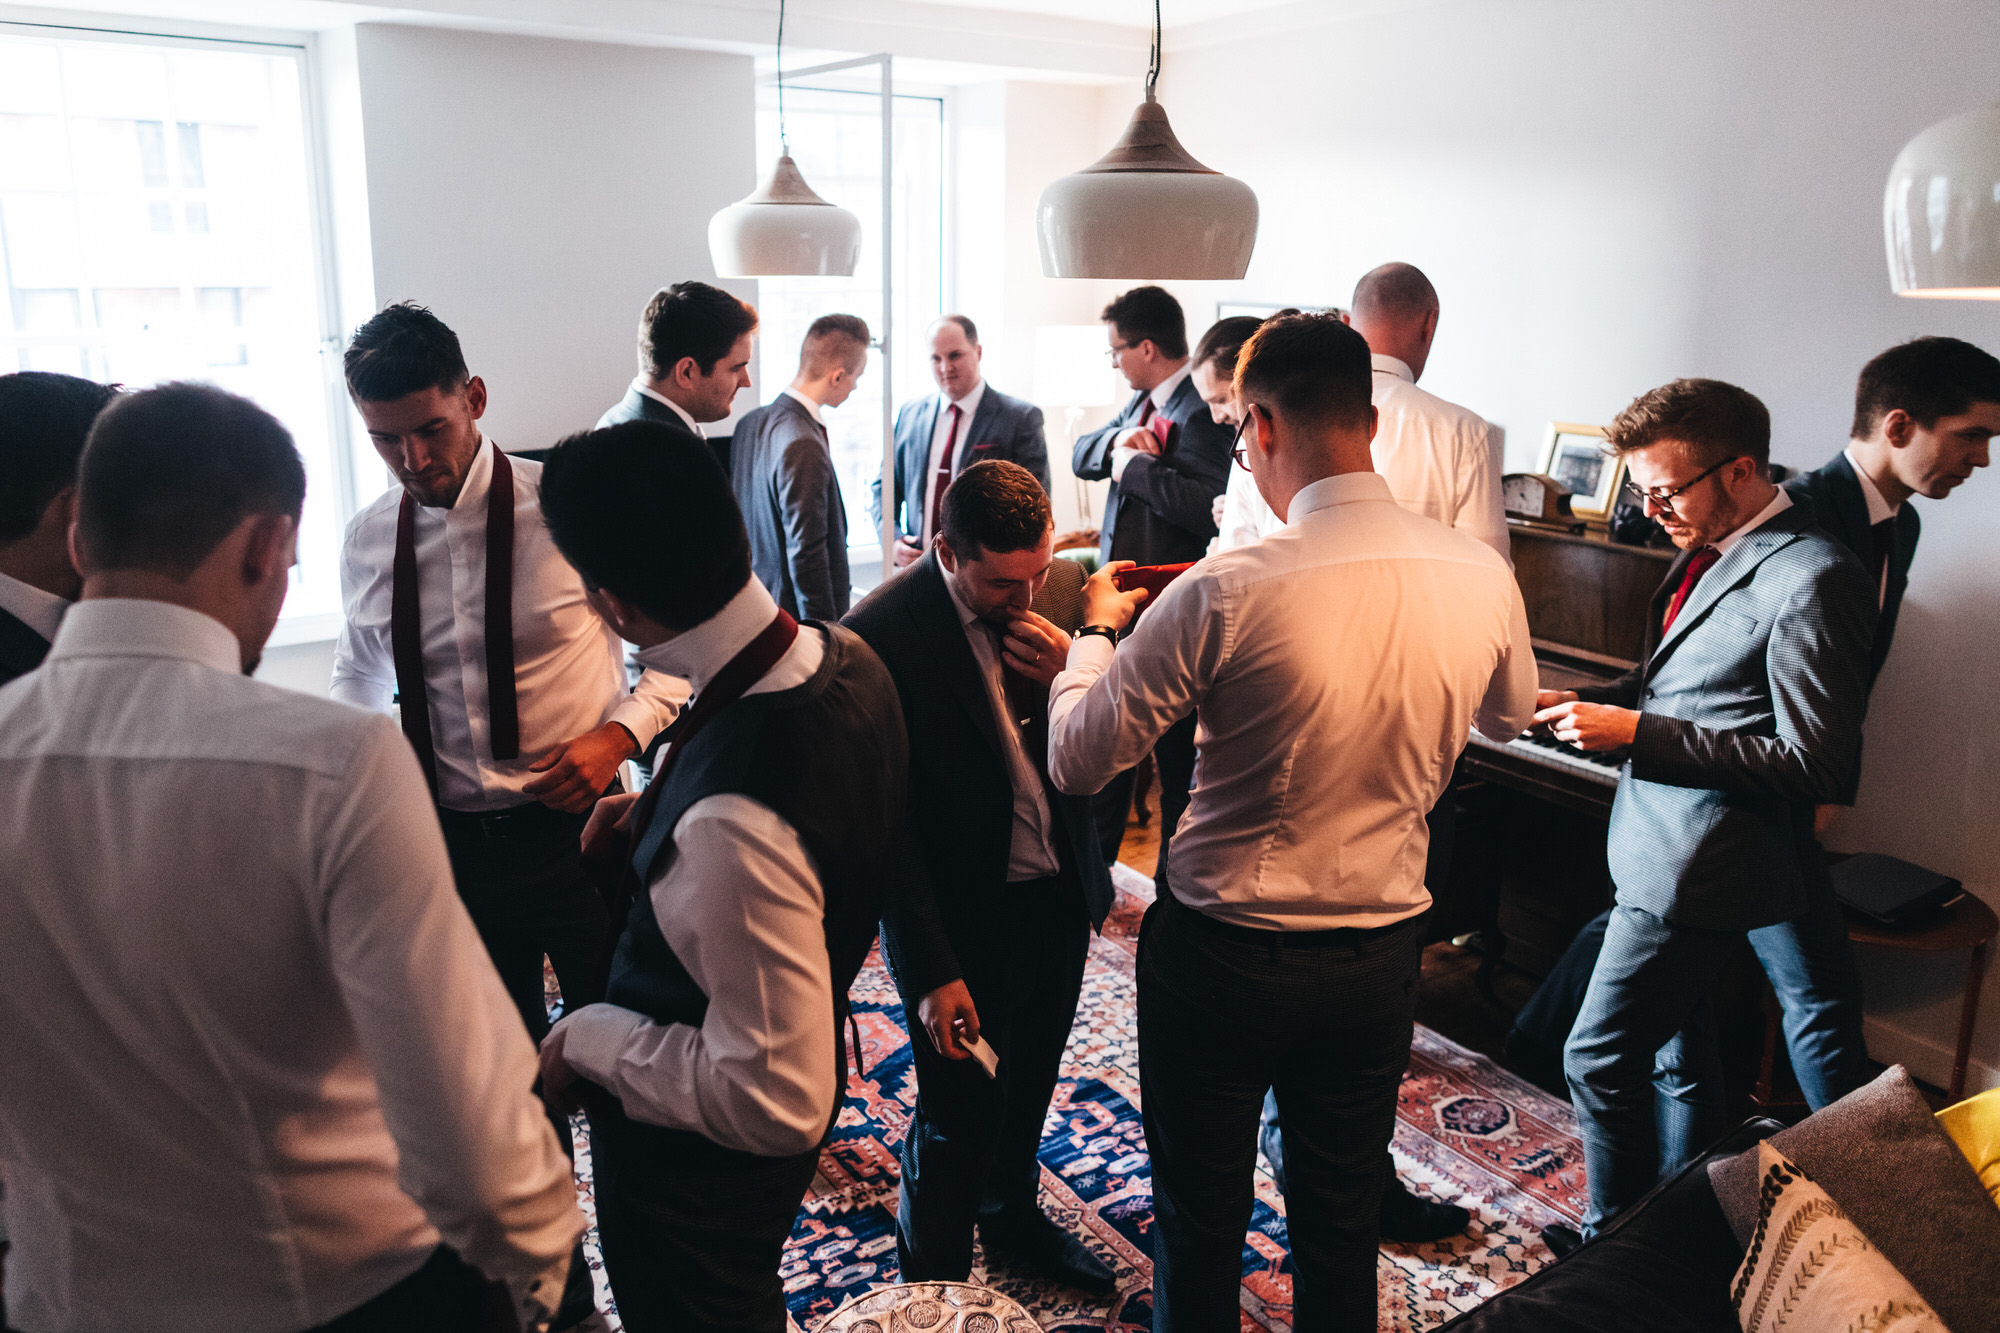 loads of groomsmen getting ready in one picture